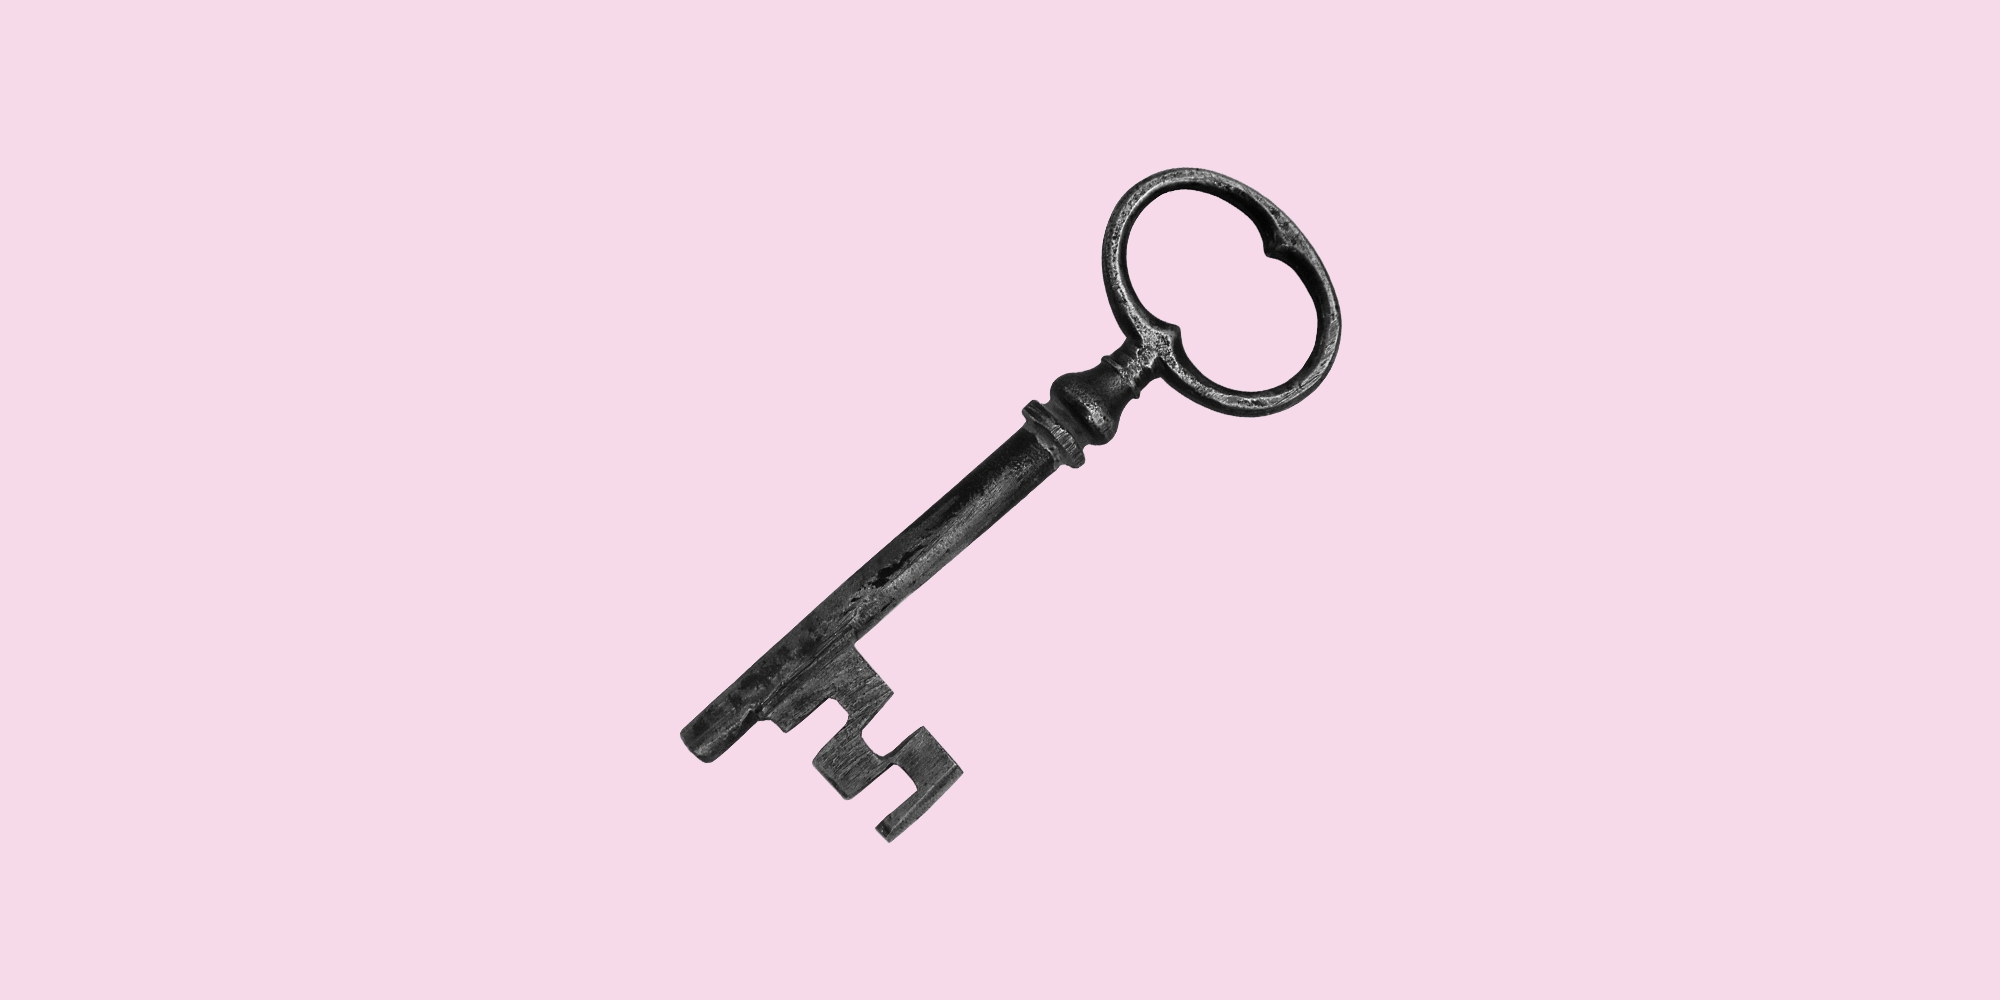 Old fashioned metal key on a lilac background. Tips for handling relapse and getting back into recovery.